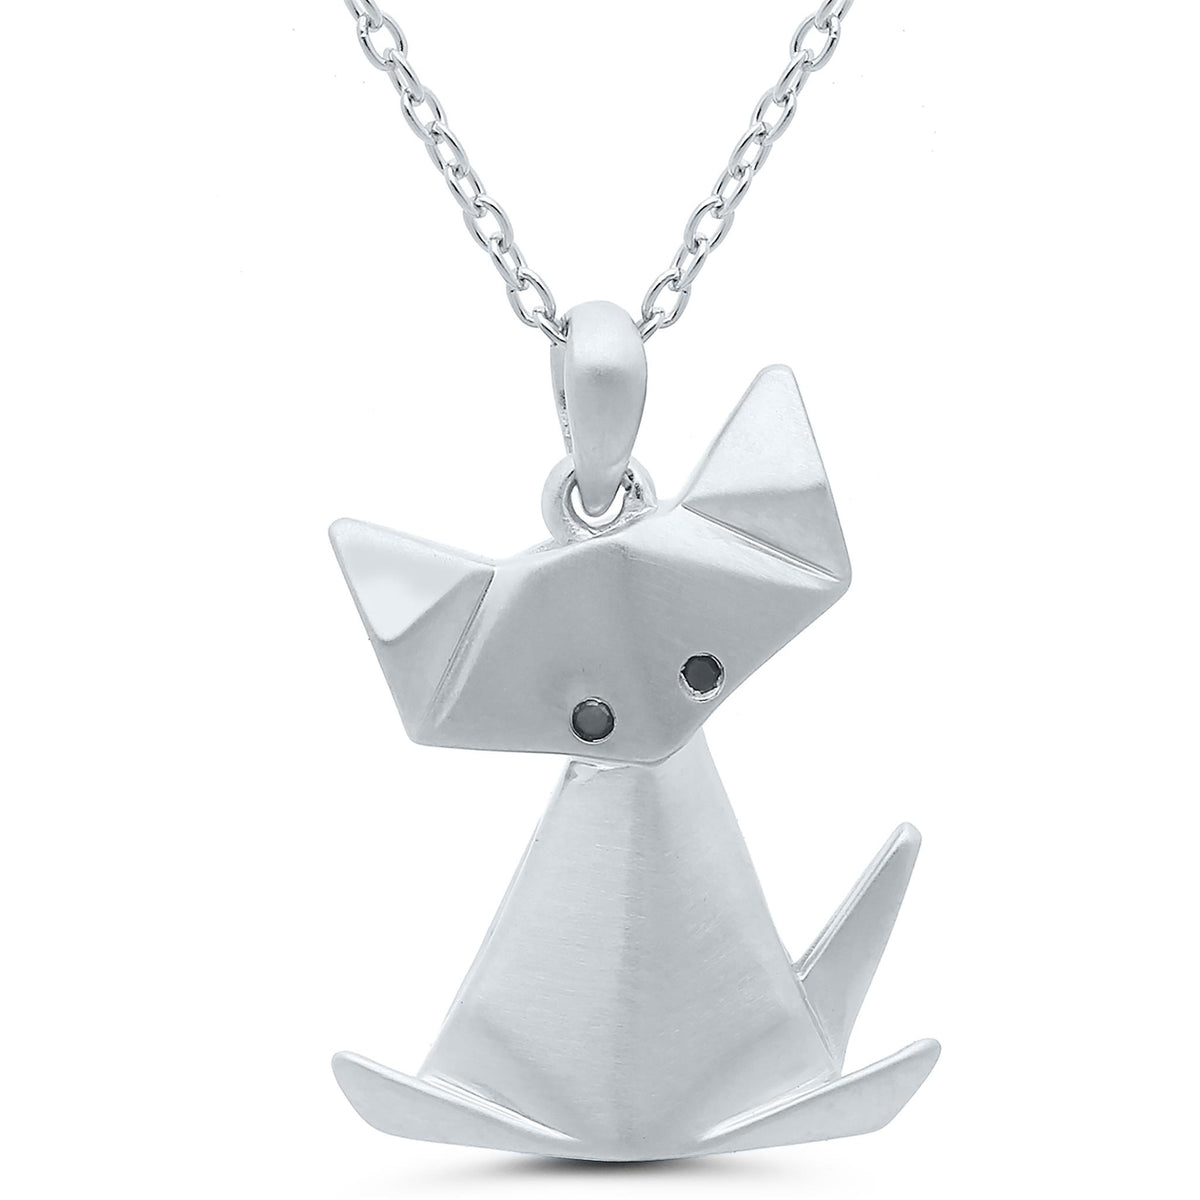 Sterling Silver Cat Origami Pendant With Black Diamond Eyes